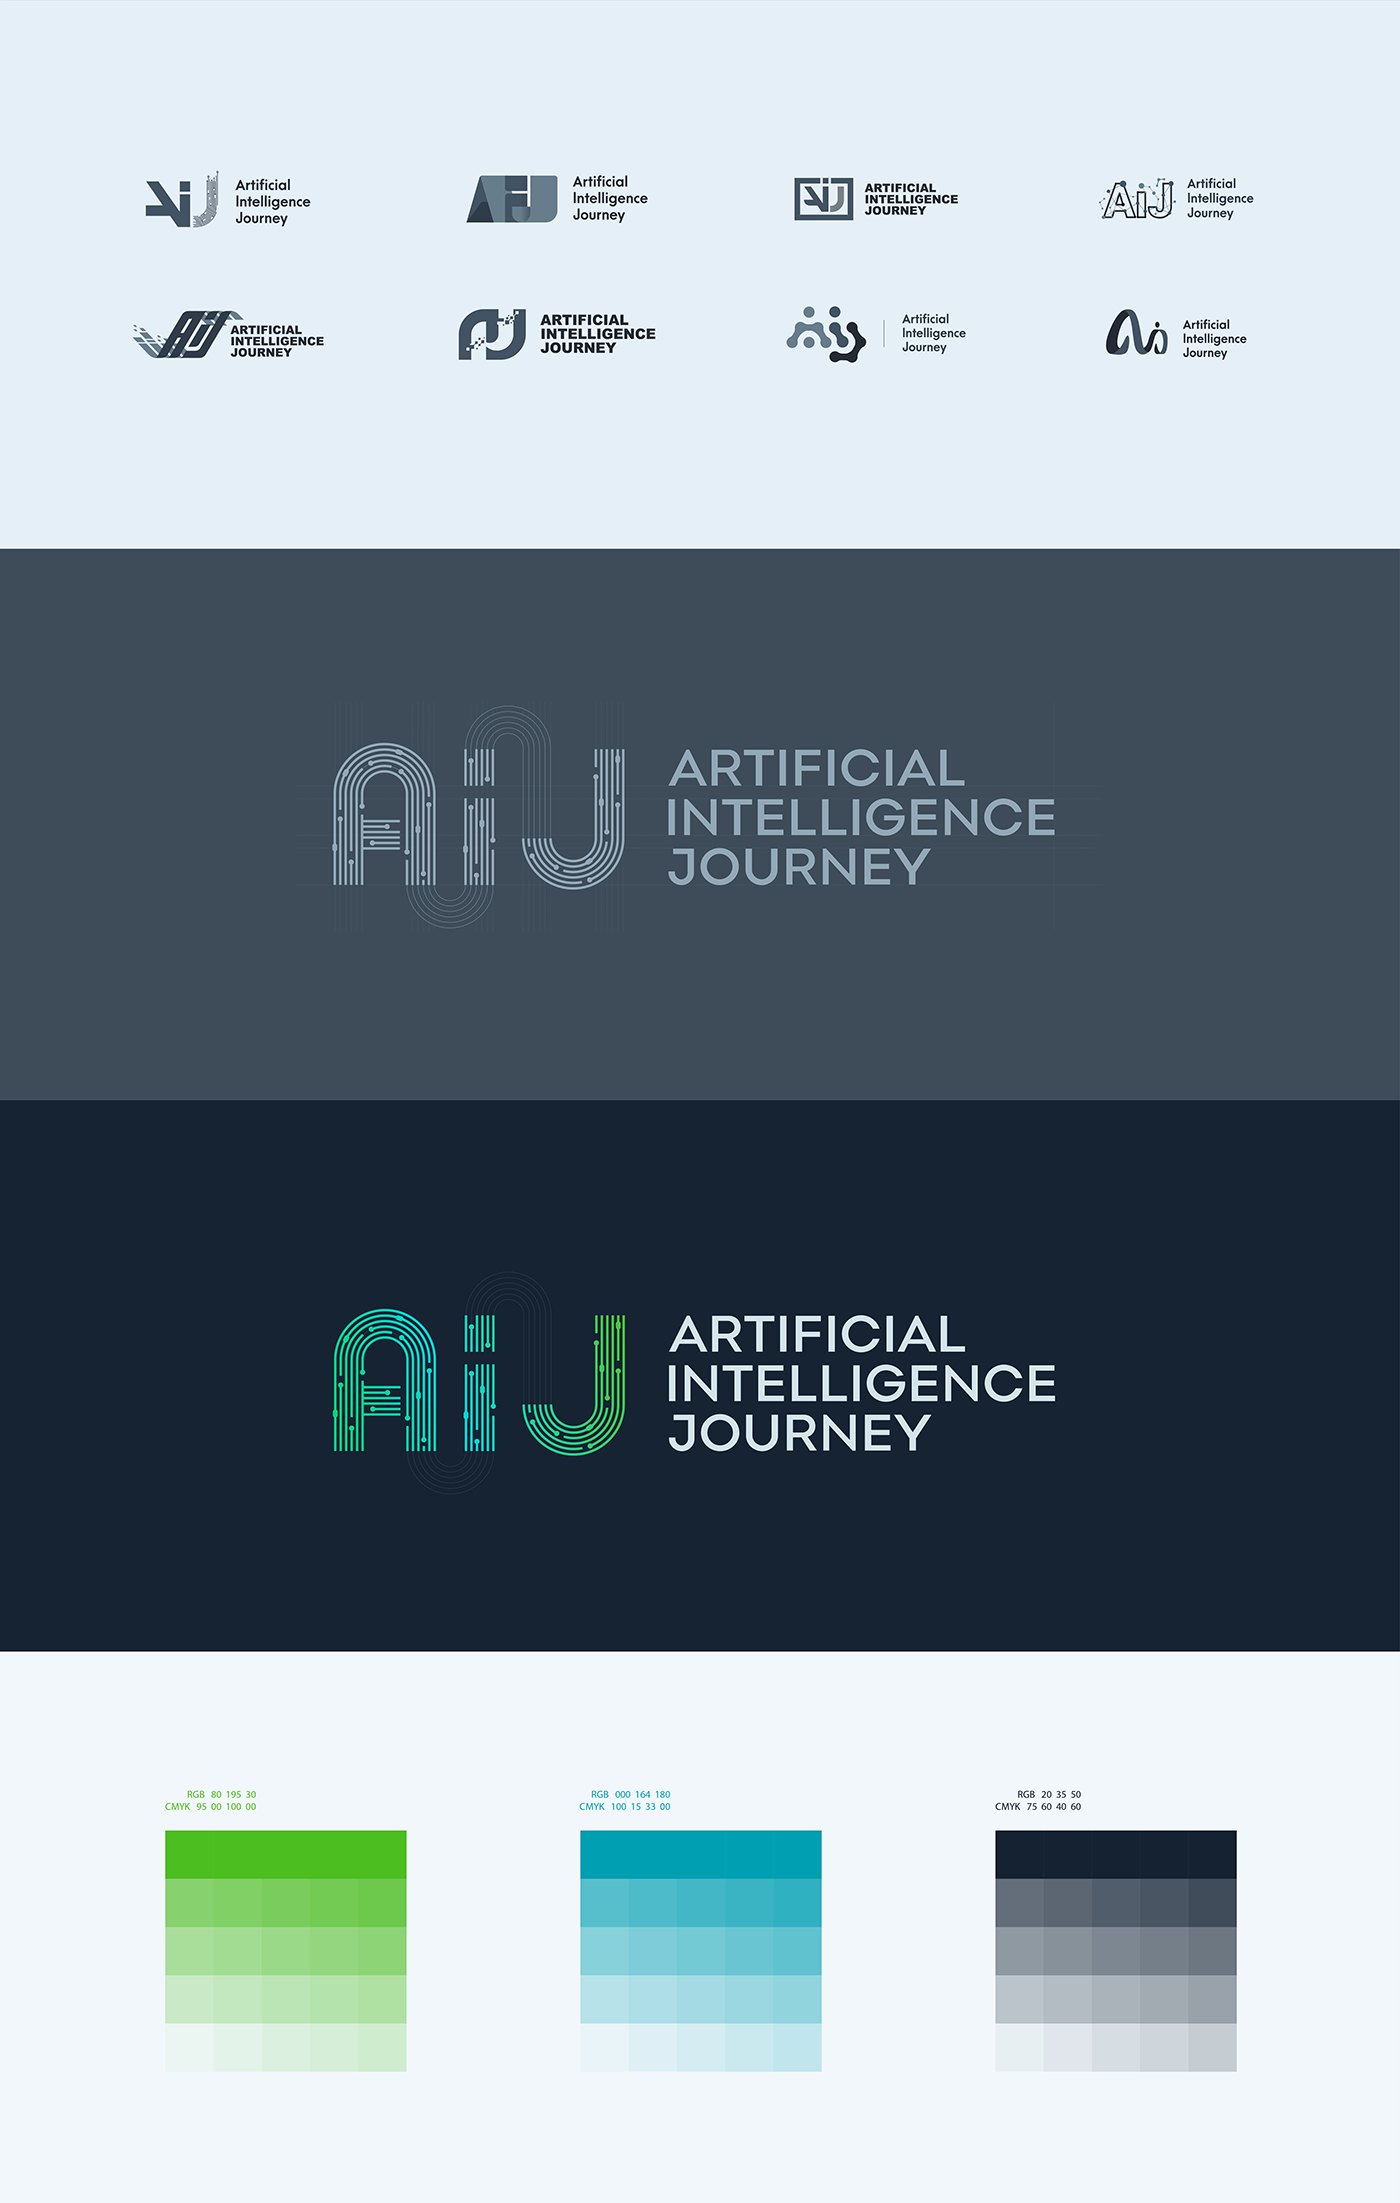 ai Aij Technology conference artificial intelligence Event artificial